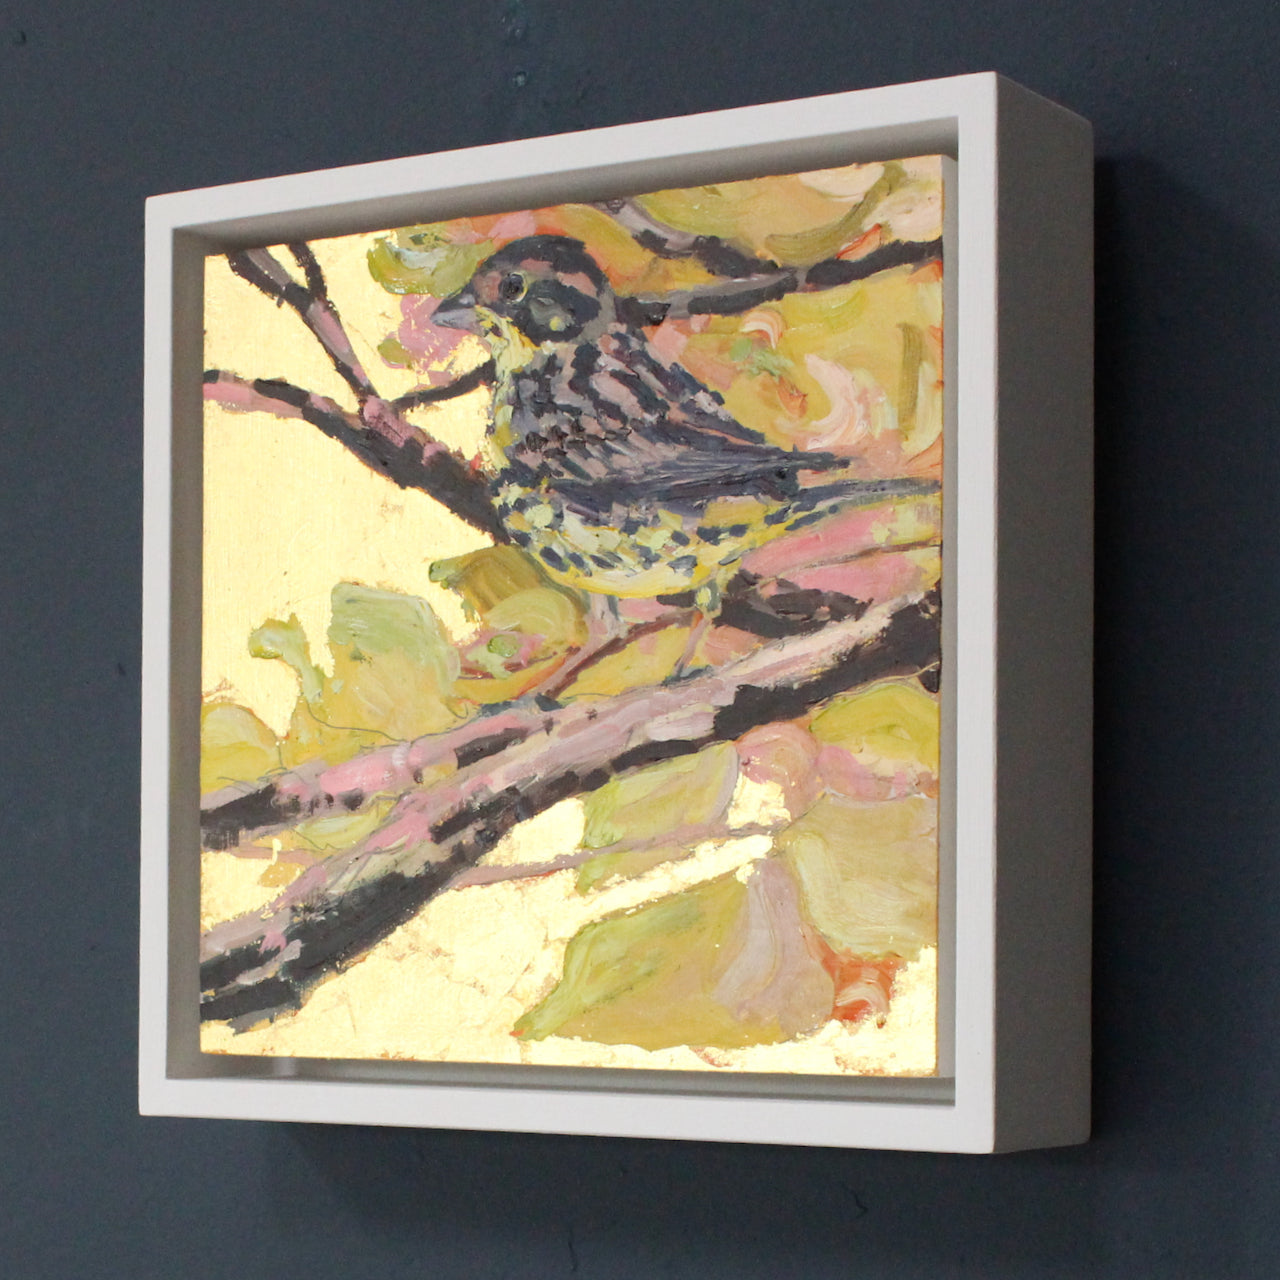 a framed Jill Hudson painting of a yellow hammer bird on a branch amid leaves in shades of yellow, gold and pink